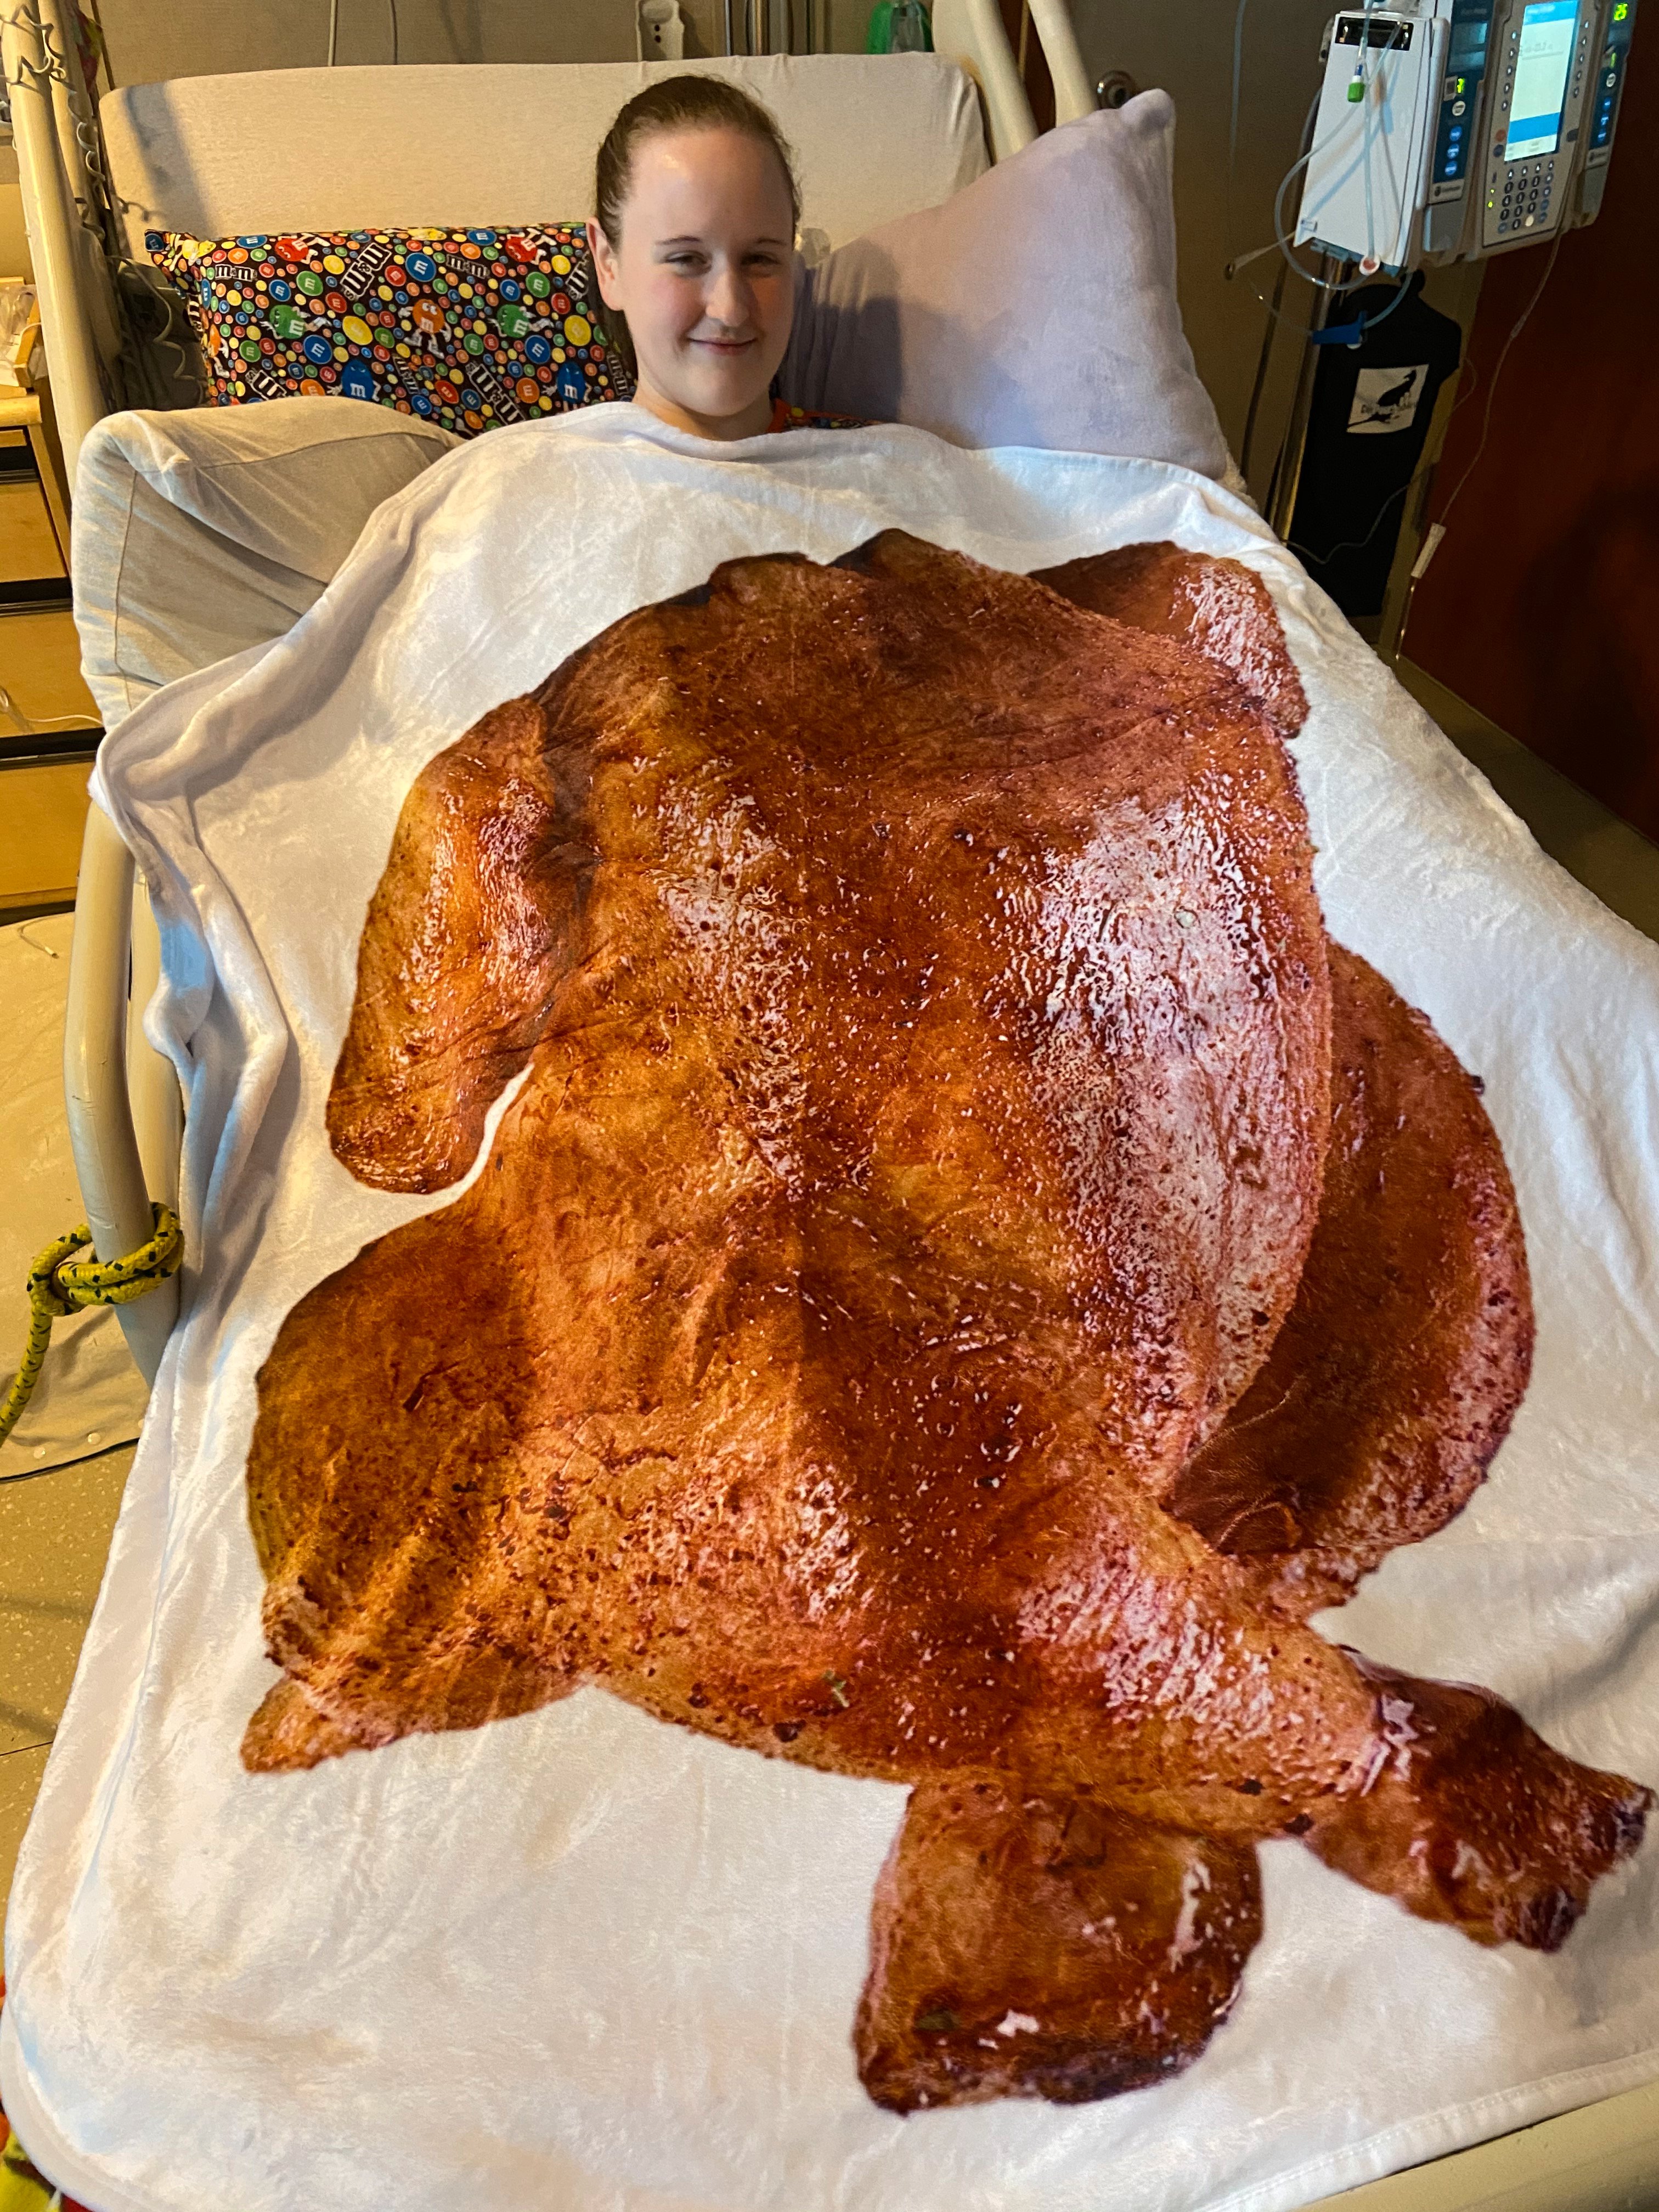 My blanket with the roasted chicken-turkey on it :)